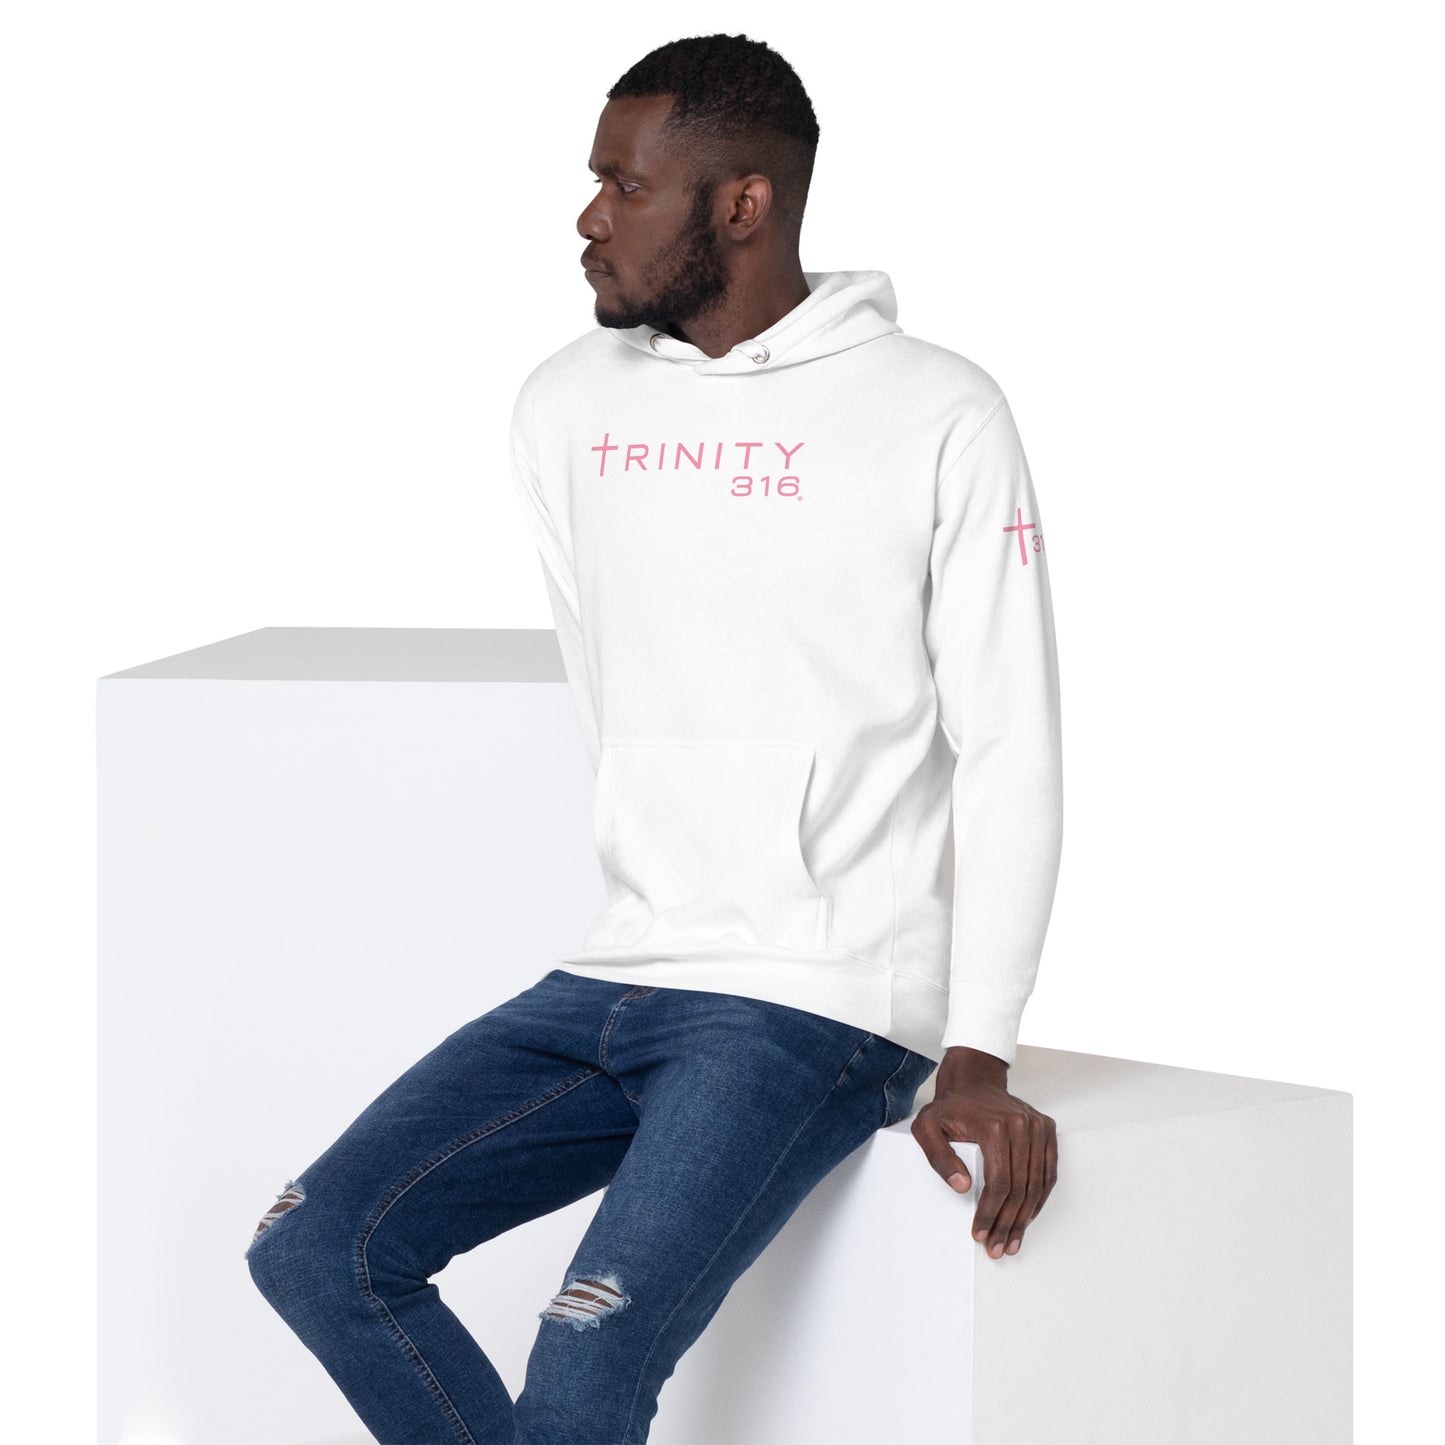 Trinity 316 Hoodie | Pink - White (Limited Edition)